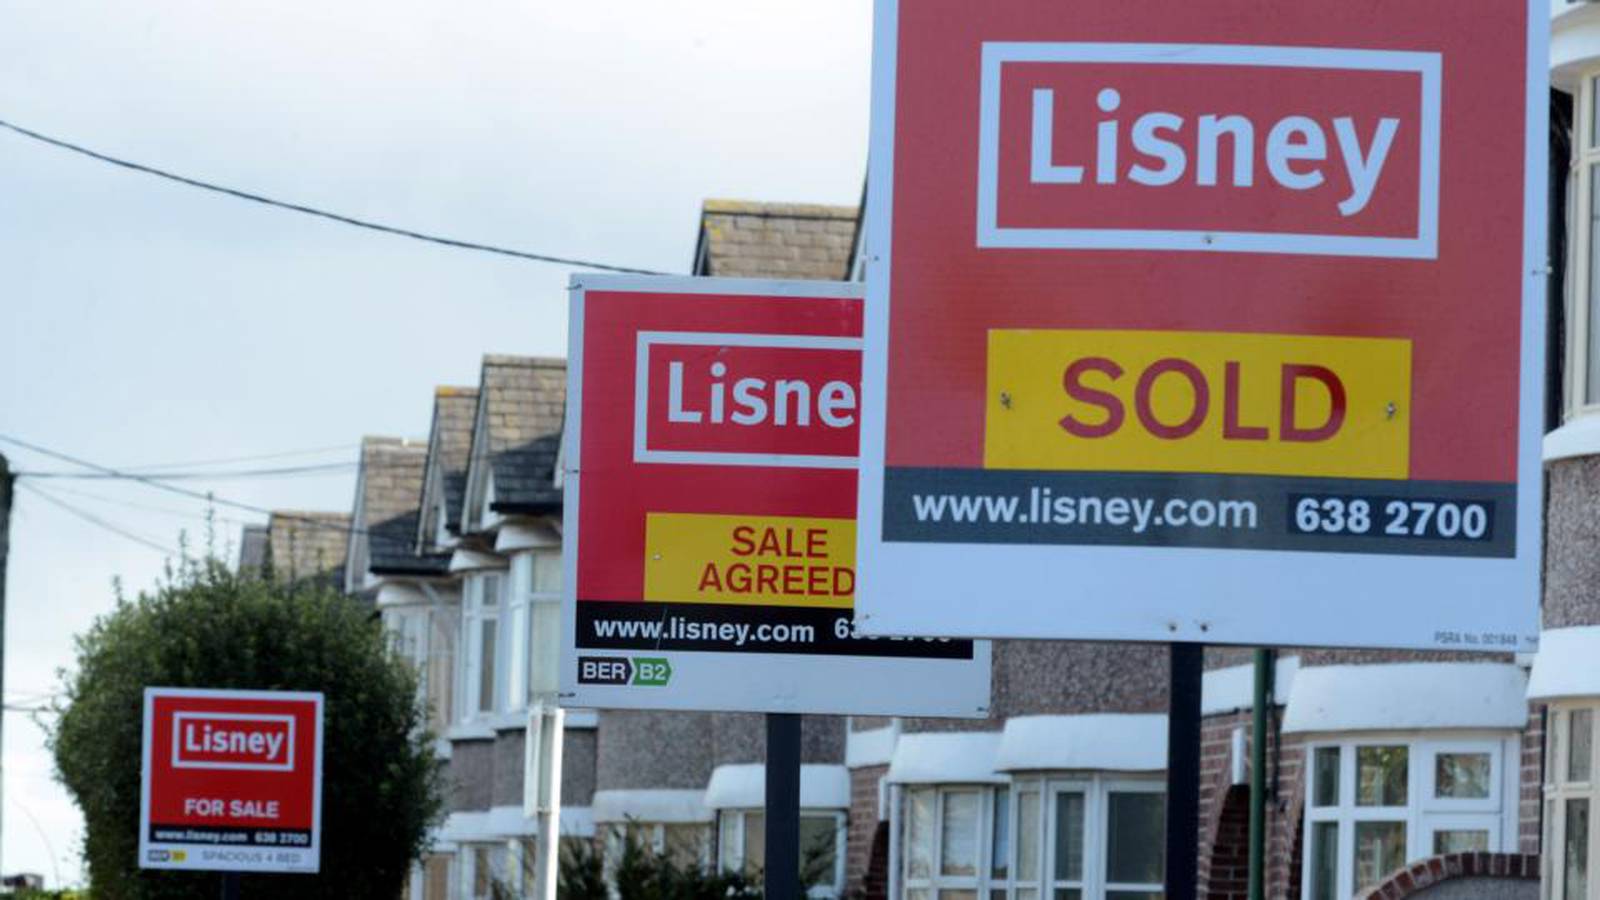 27/02/2014 Property /for Sale signs
Homes for Sale  on the Sandymount Road in Dublin.Photograph: Cyril Byrne / THE IRISH TIMES